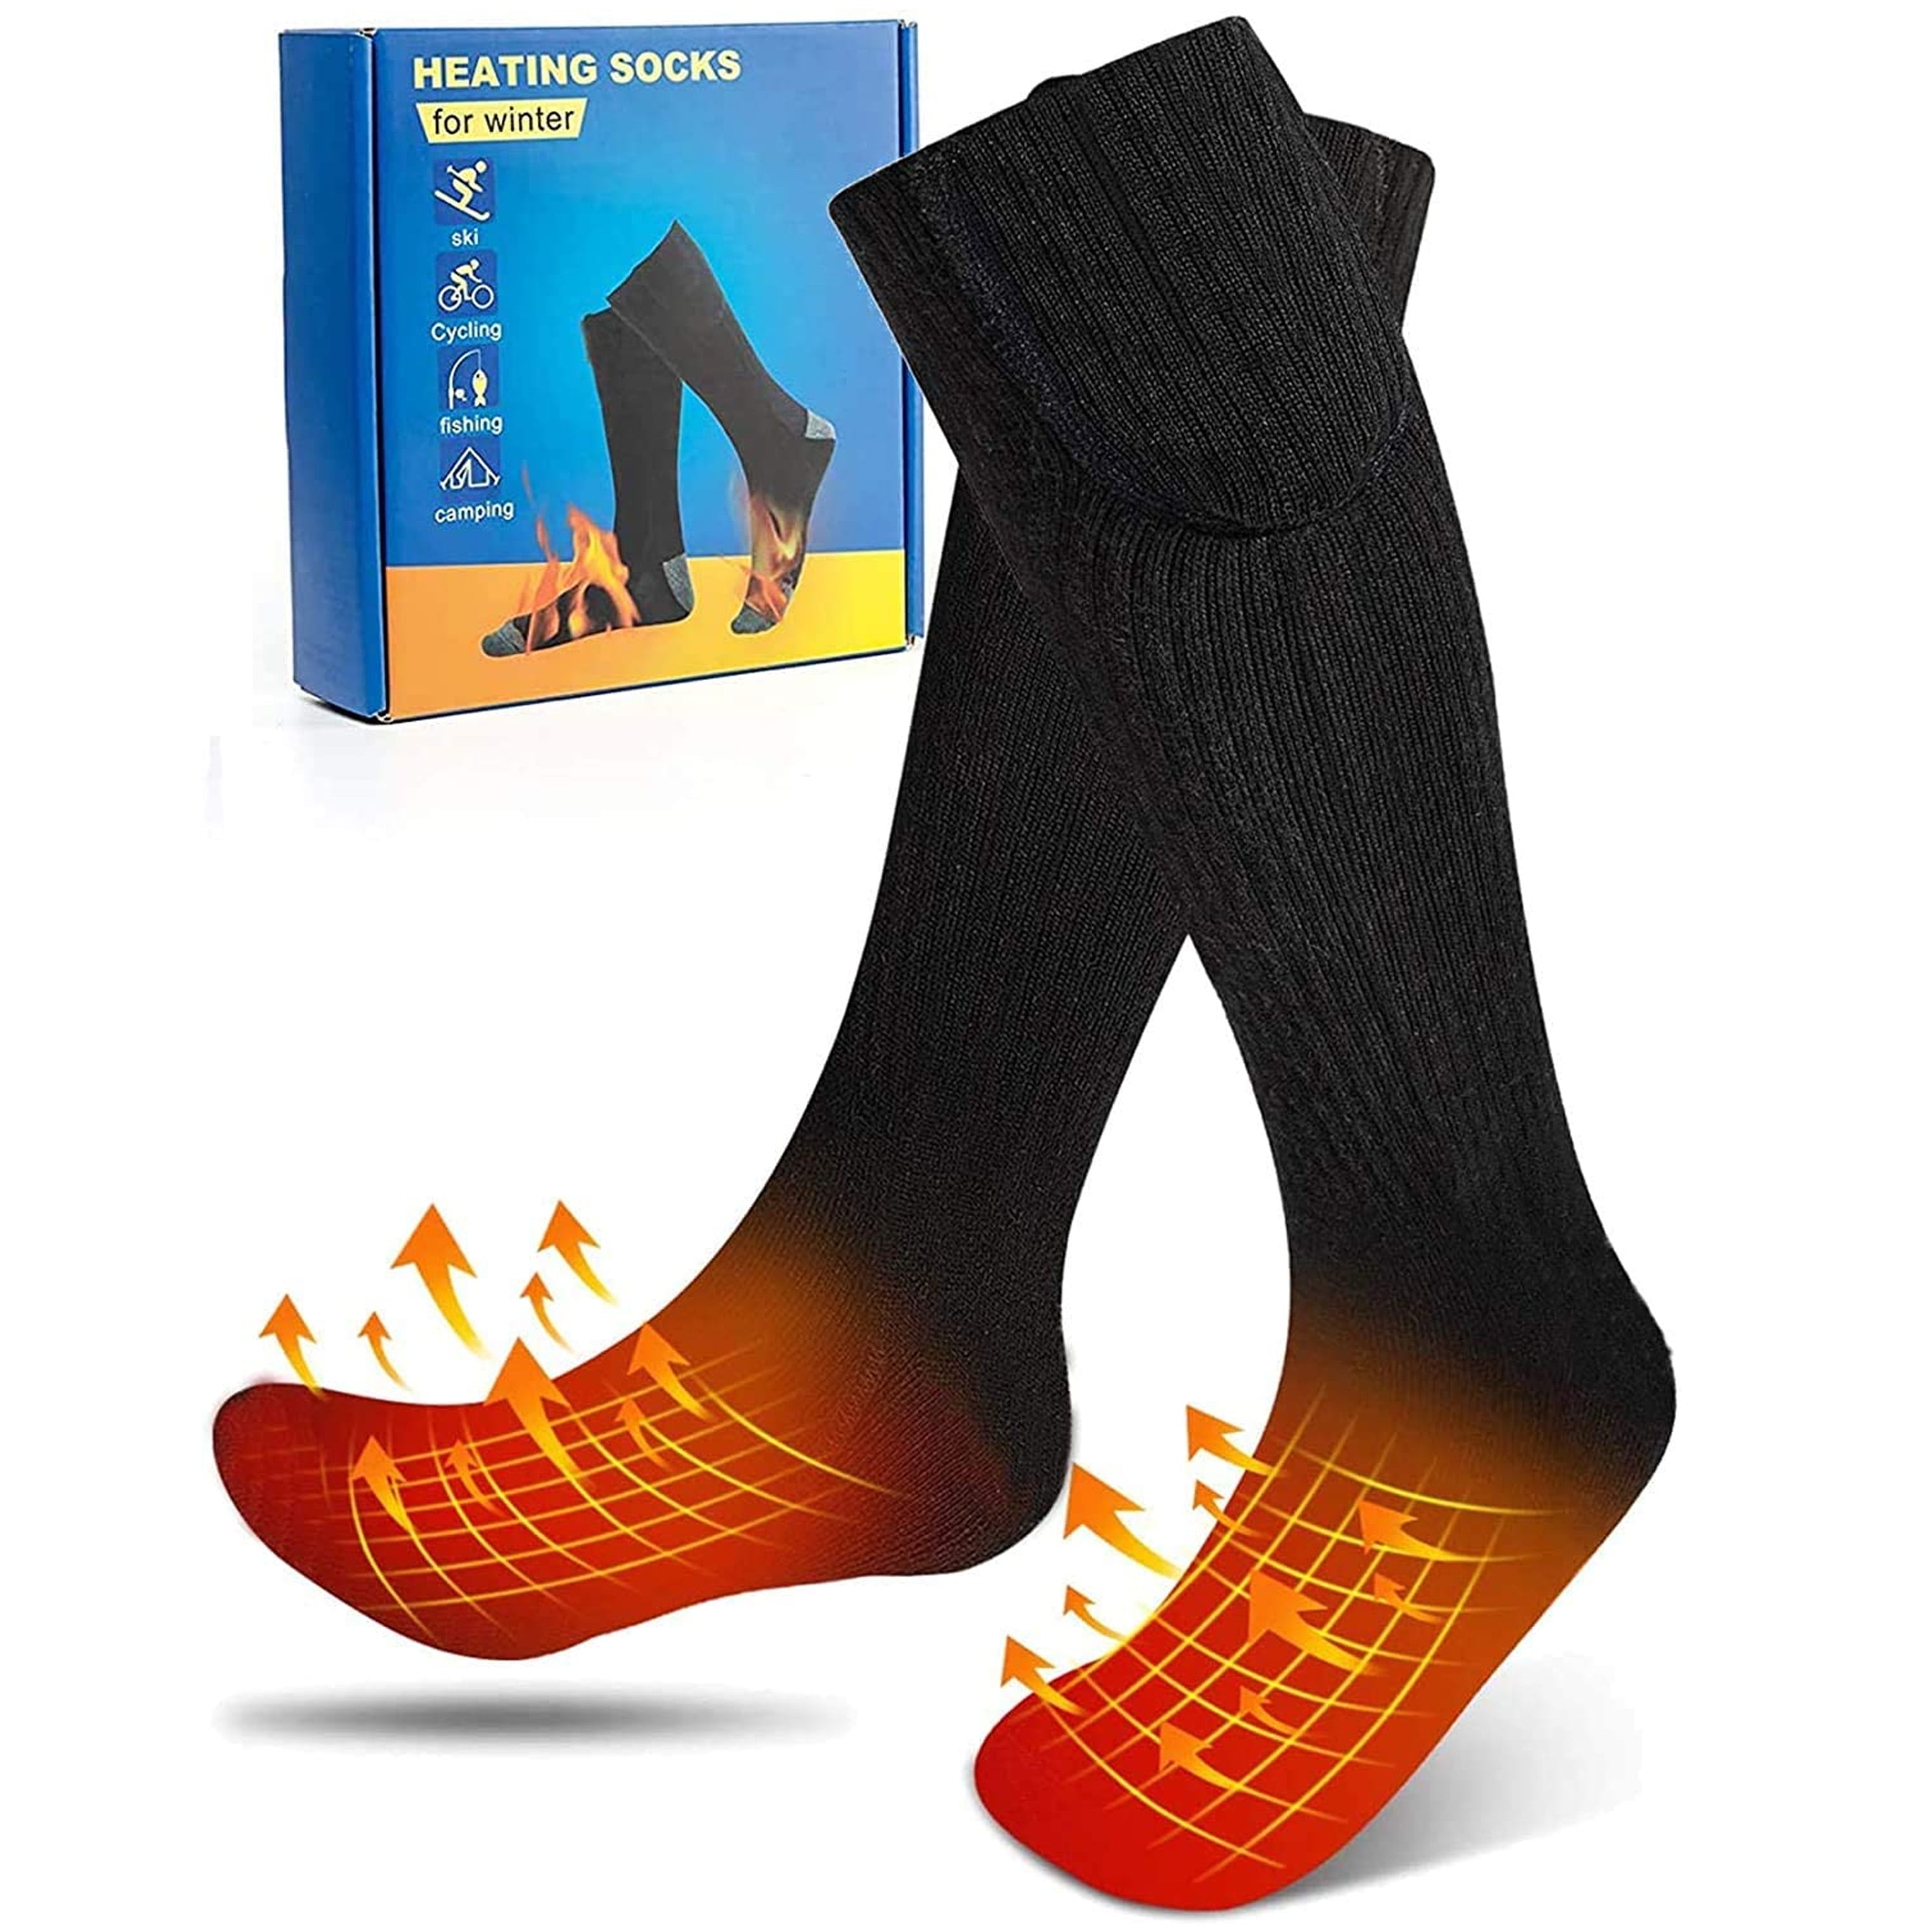  2023 Upgraded 4000mAh Rechargeable Heated Socks for Men Women -  Washable Electric Thermal Warming Socks for Hunting Winter Skiing Outdoors  (Fit Women 10-16 / Men 9-15 (Shoe Size)) : Sports & Outdoors